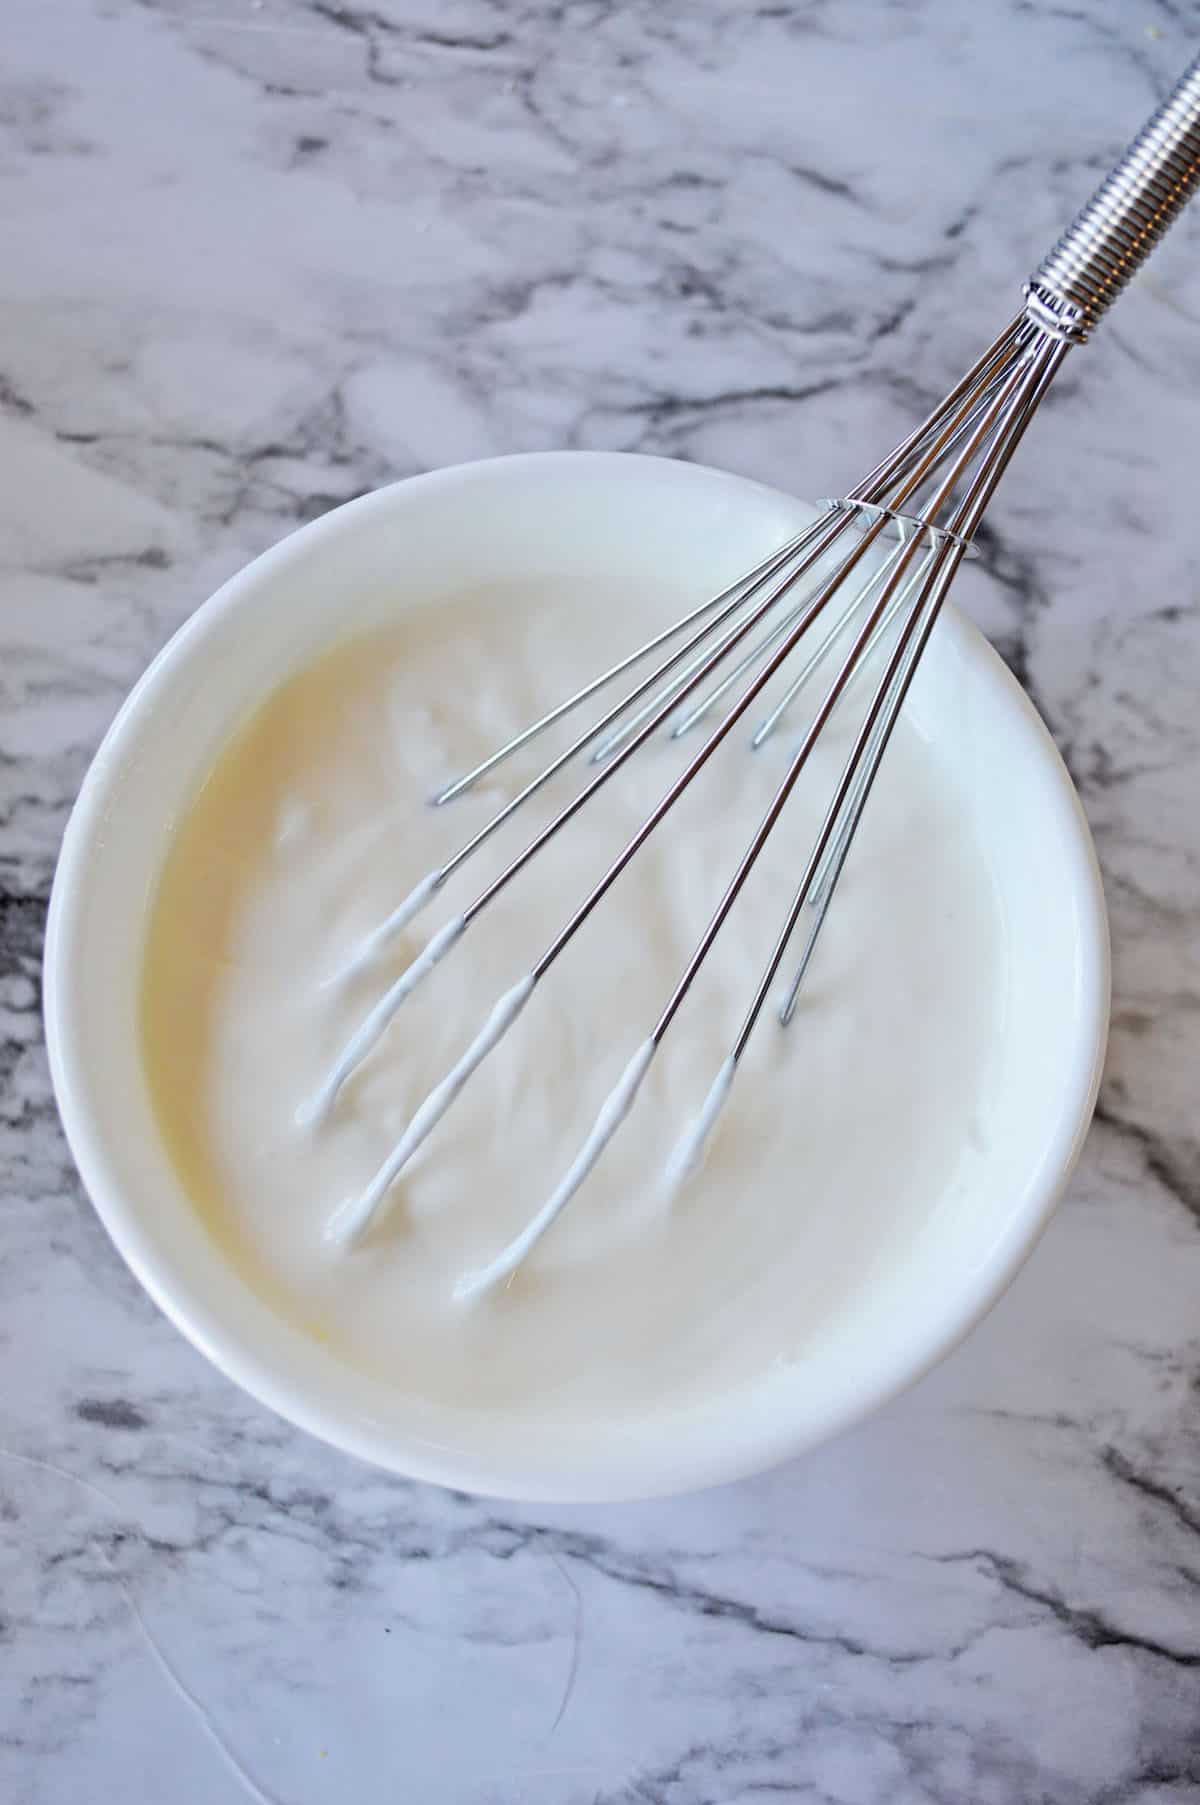 Sour cream and lemon in a white bowl with a whisk.